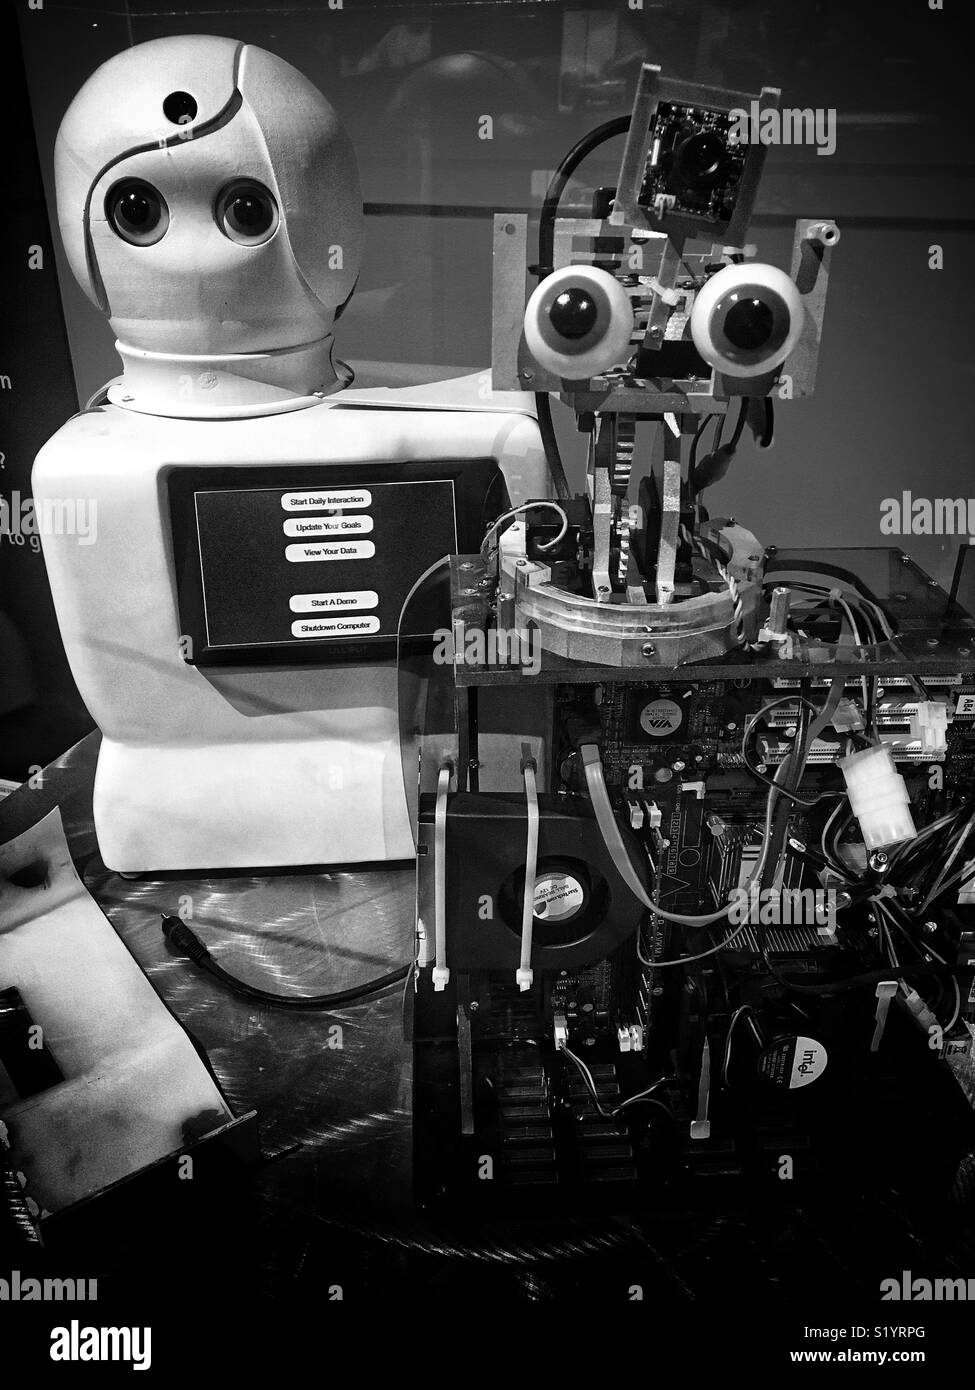 Two robots at the AI exhibit at MIT Museum in Boston. May 2017. In black and white. Stock Photo